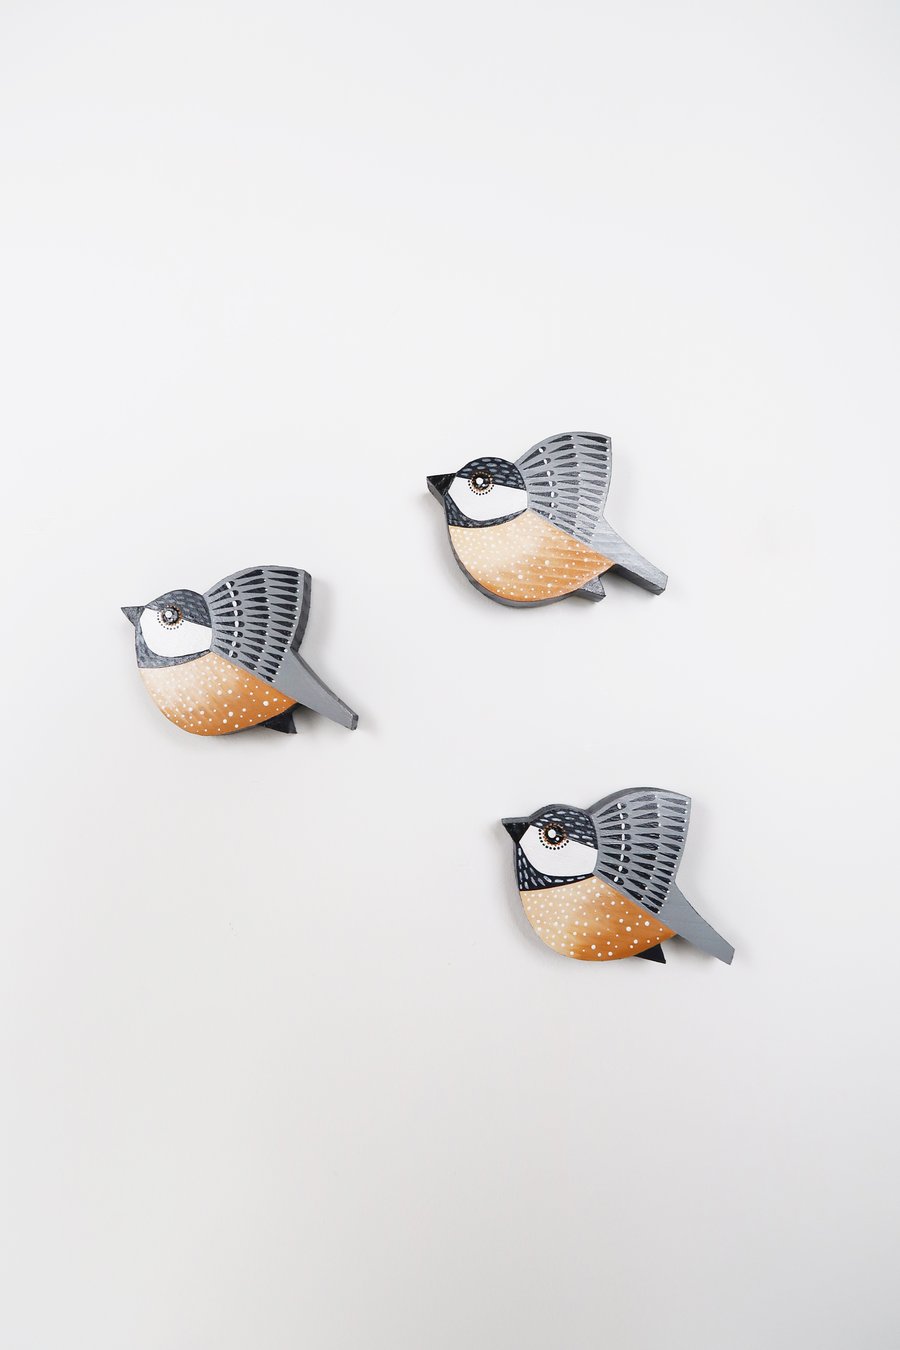 Coal tit wall hanging, set of 3 miniature flying bird, wooden decorations.